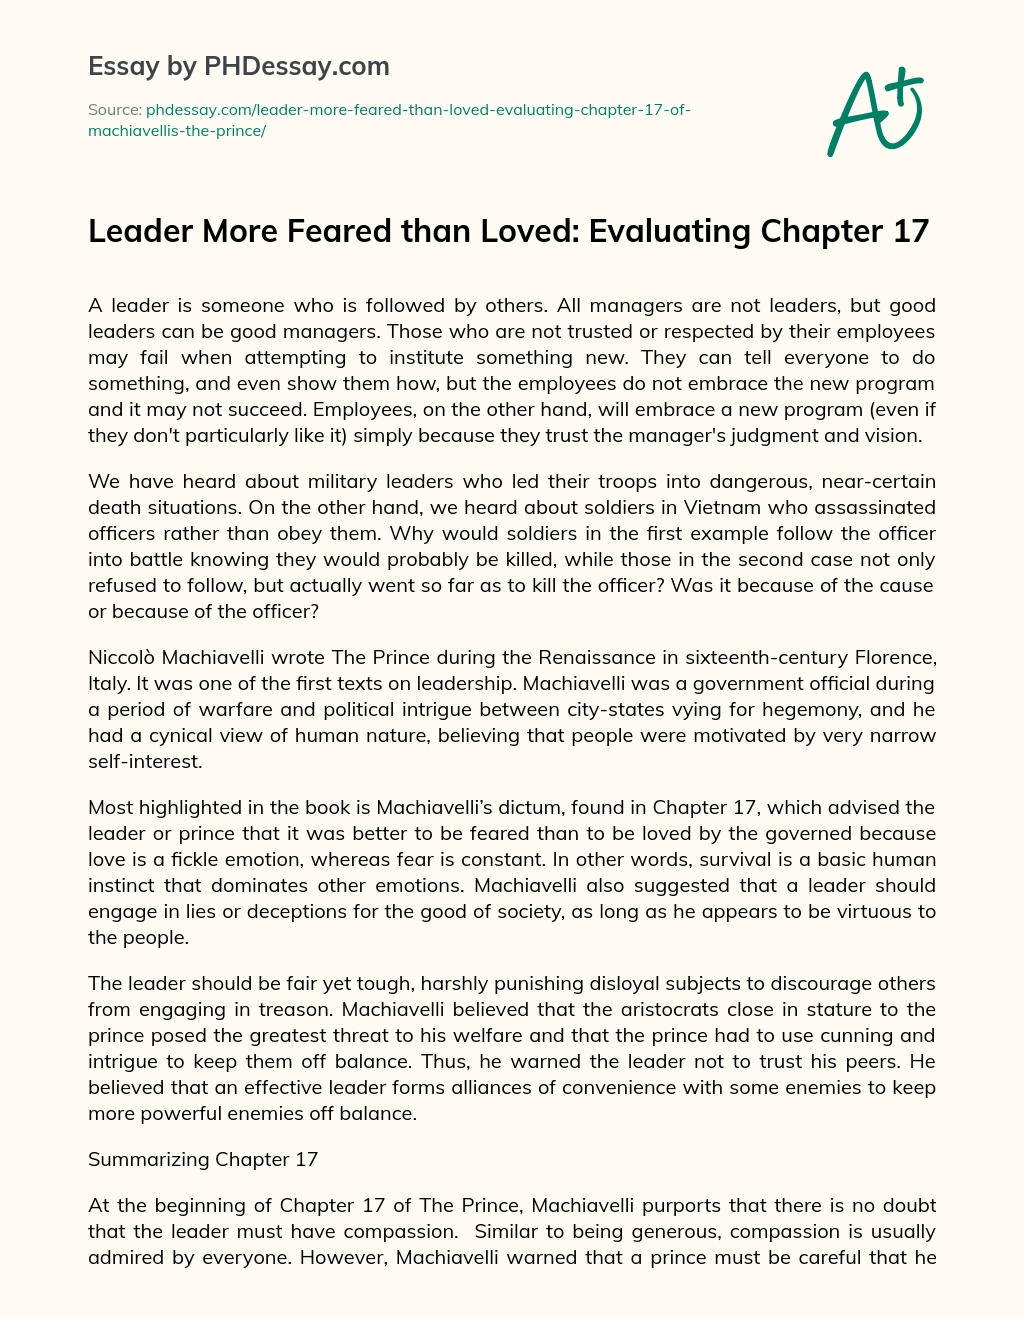 Leader More Feared than Loved: Evaluating Chapter 17 essay